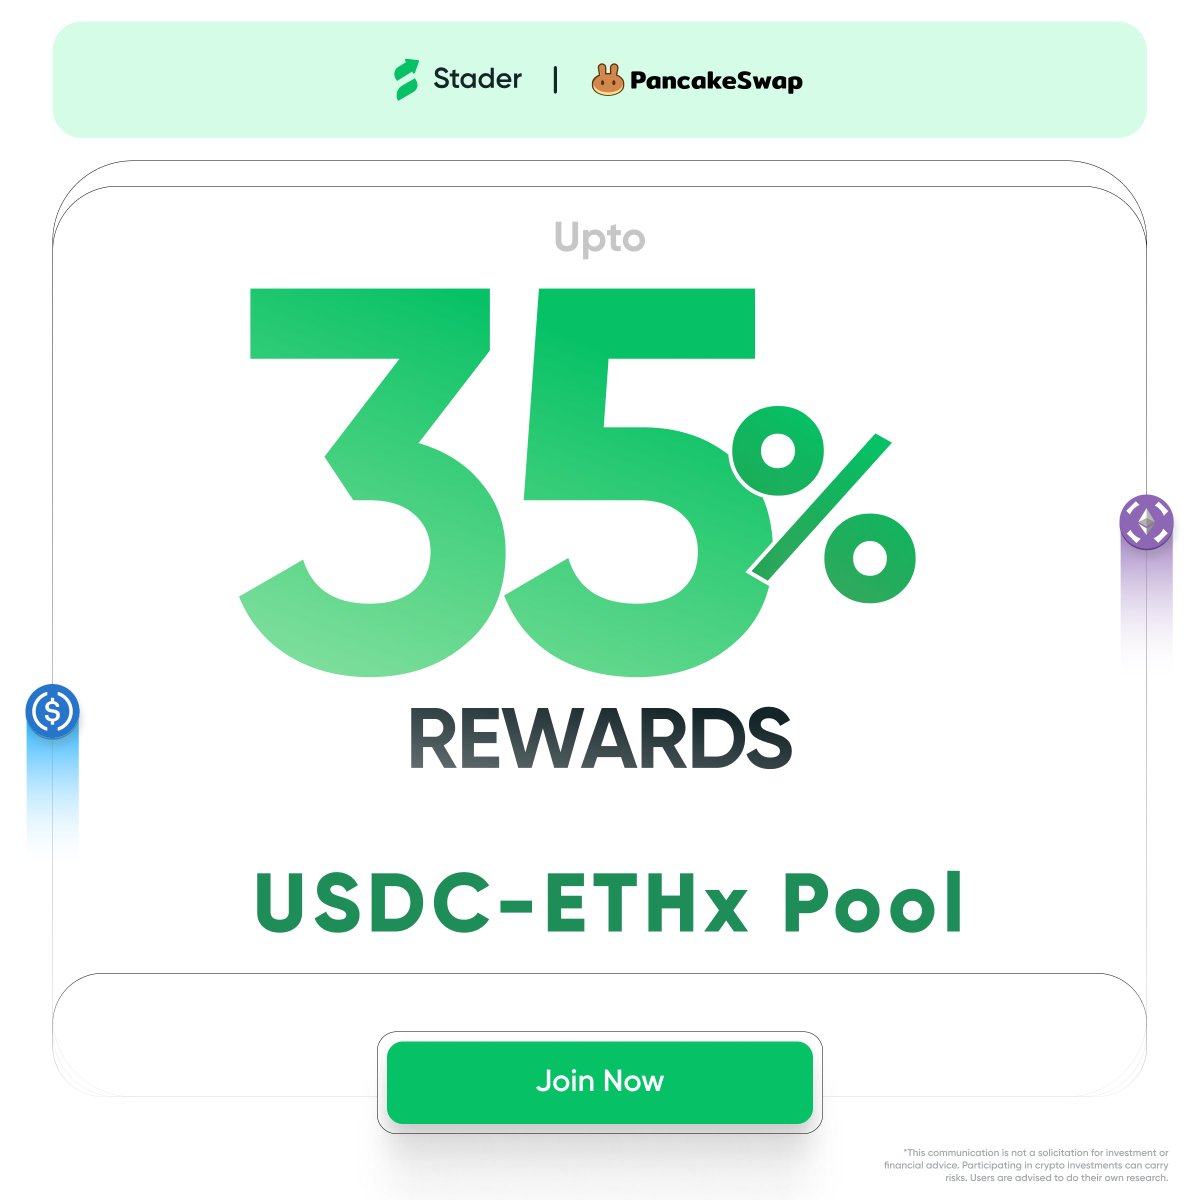 Get up to 35% rewards with $ETHx! Add liquidity to the $USDC - $ETHx pool on @PancakeSwap & get: 💠 $CAKE rewards 💠 $ETHx staking rewards Deposit now! 💰 pancakeswap.finance/position-manag…